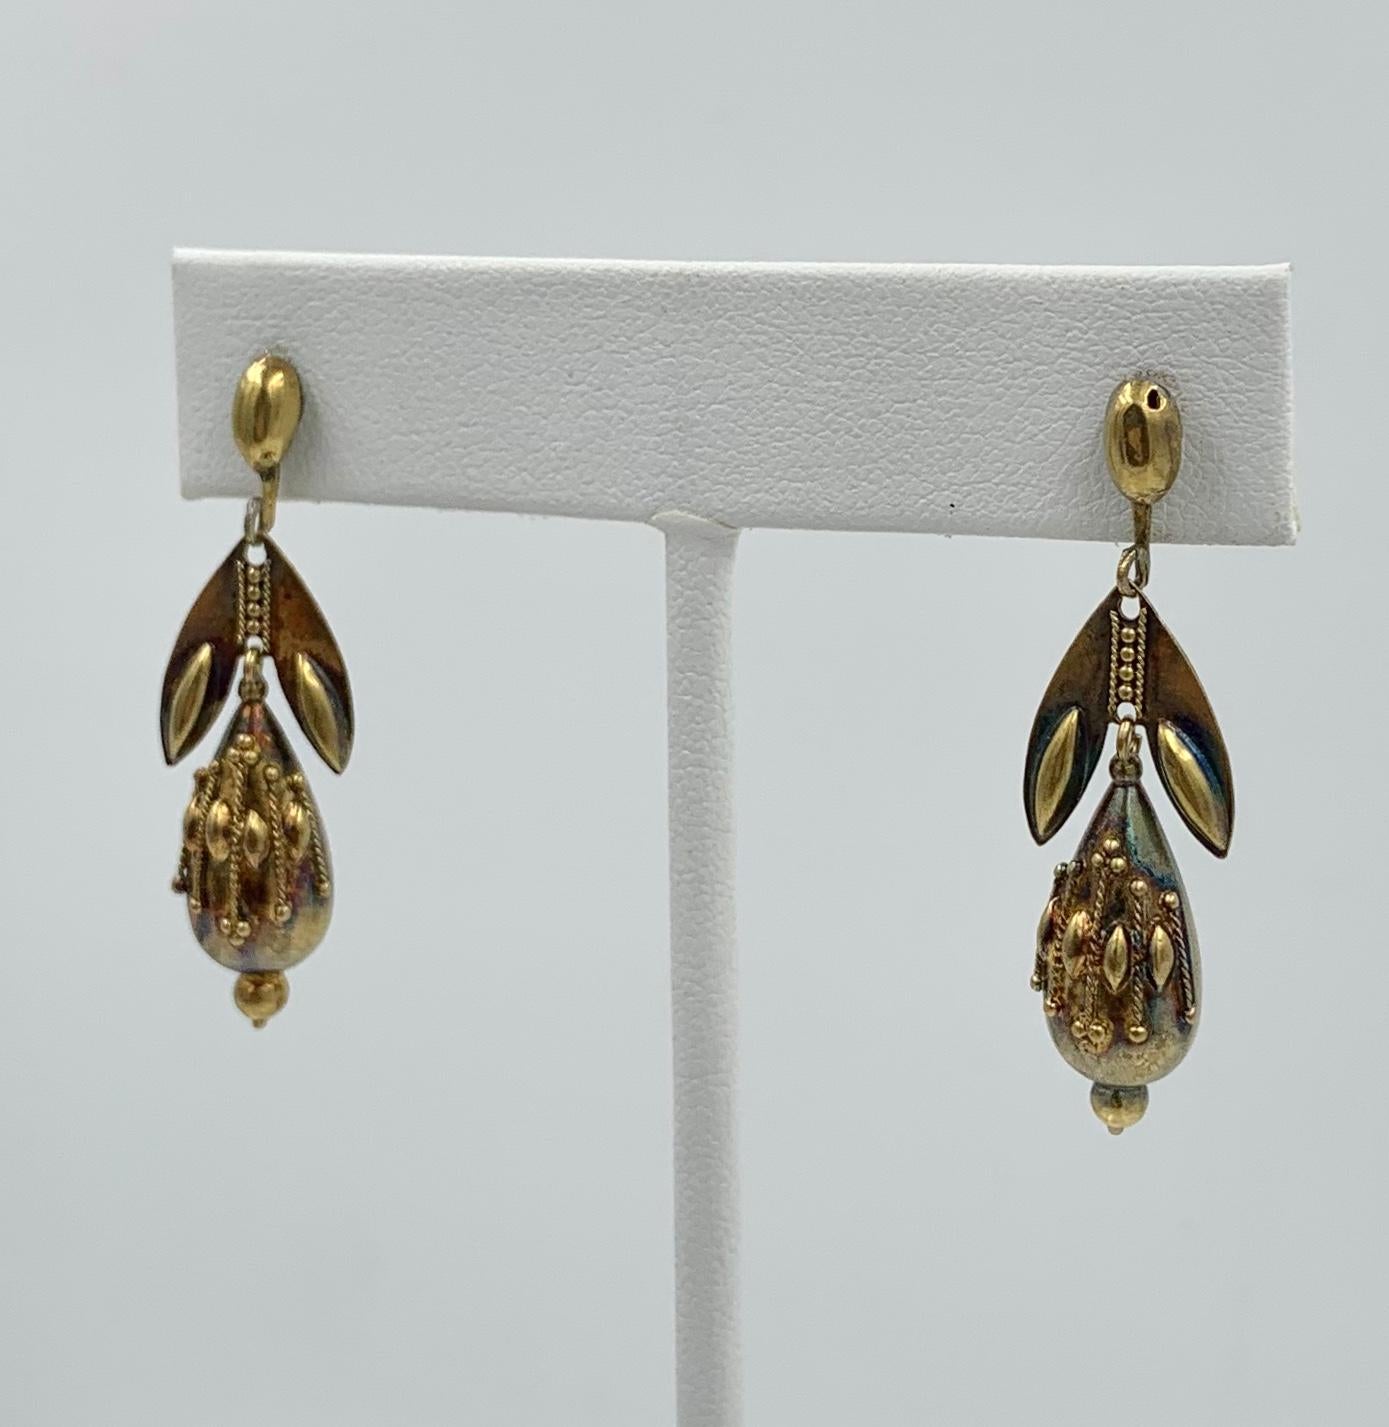 A spectacular pair of early Antique Etruscan Revival Victorian Torpedo Pendant Dangle Drop Earrings in 14 - 16 Karat Rose Gold.   These earrings are of the highest quality.  They have extraordinary Etruscan beaded granulation - the hand applied tiny